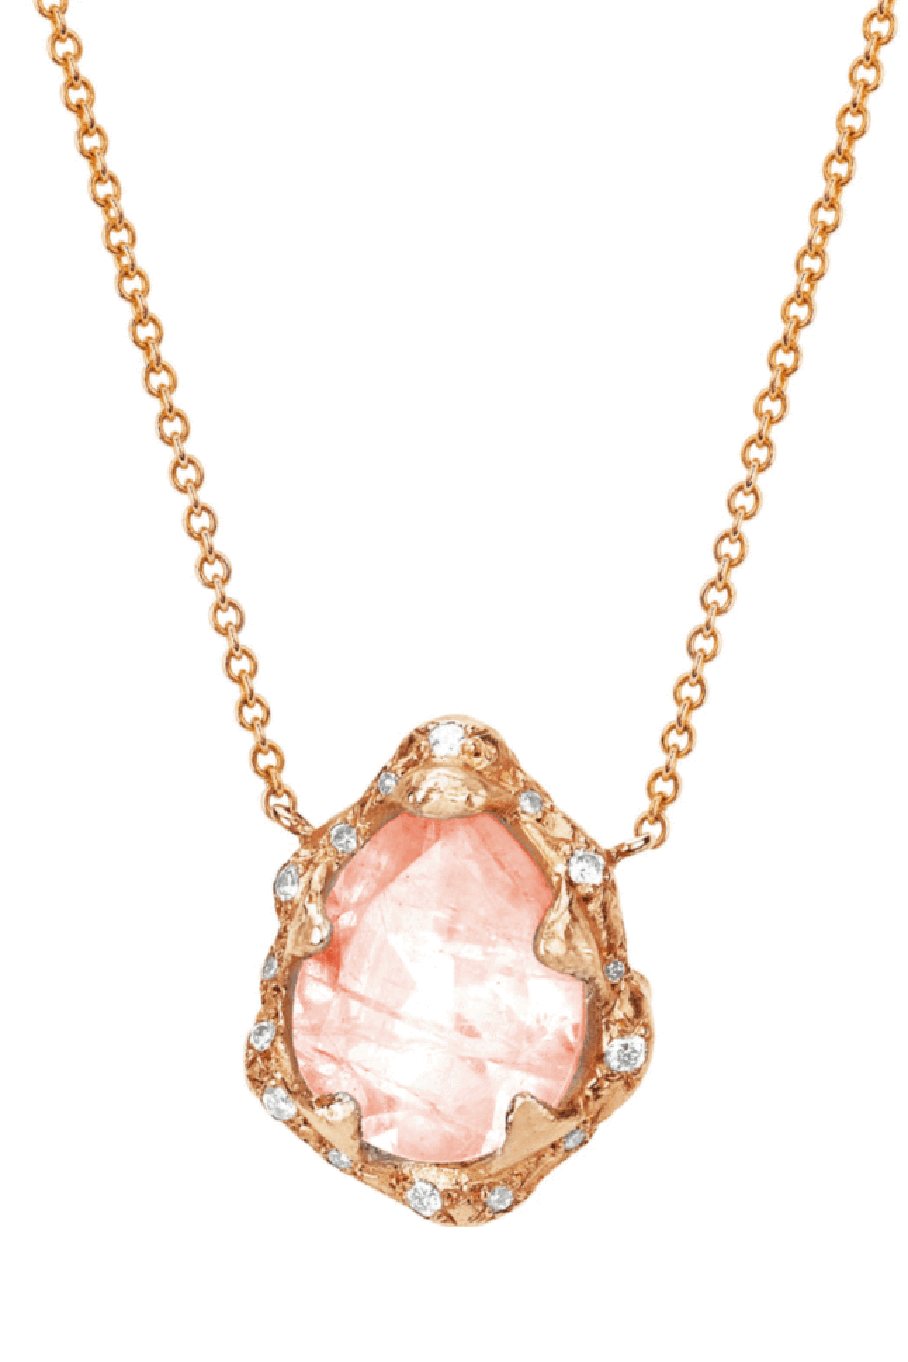 LOGAN HOLLOWELL-Baby Queen Water Drop Morganite Necklace with Sprinkled Diamonds-